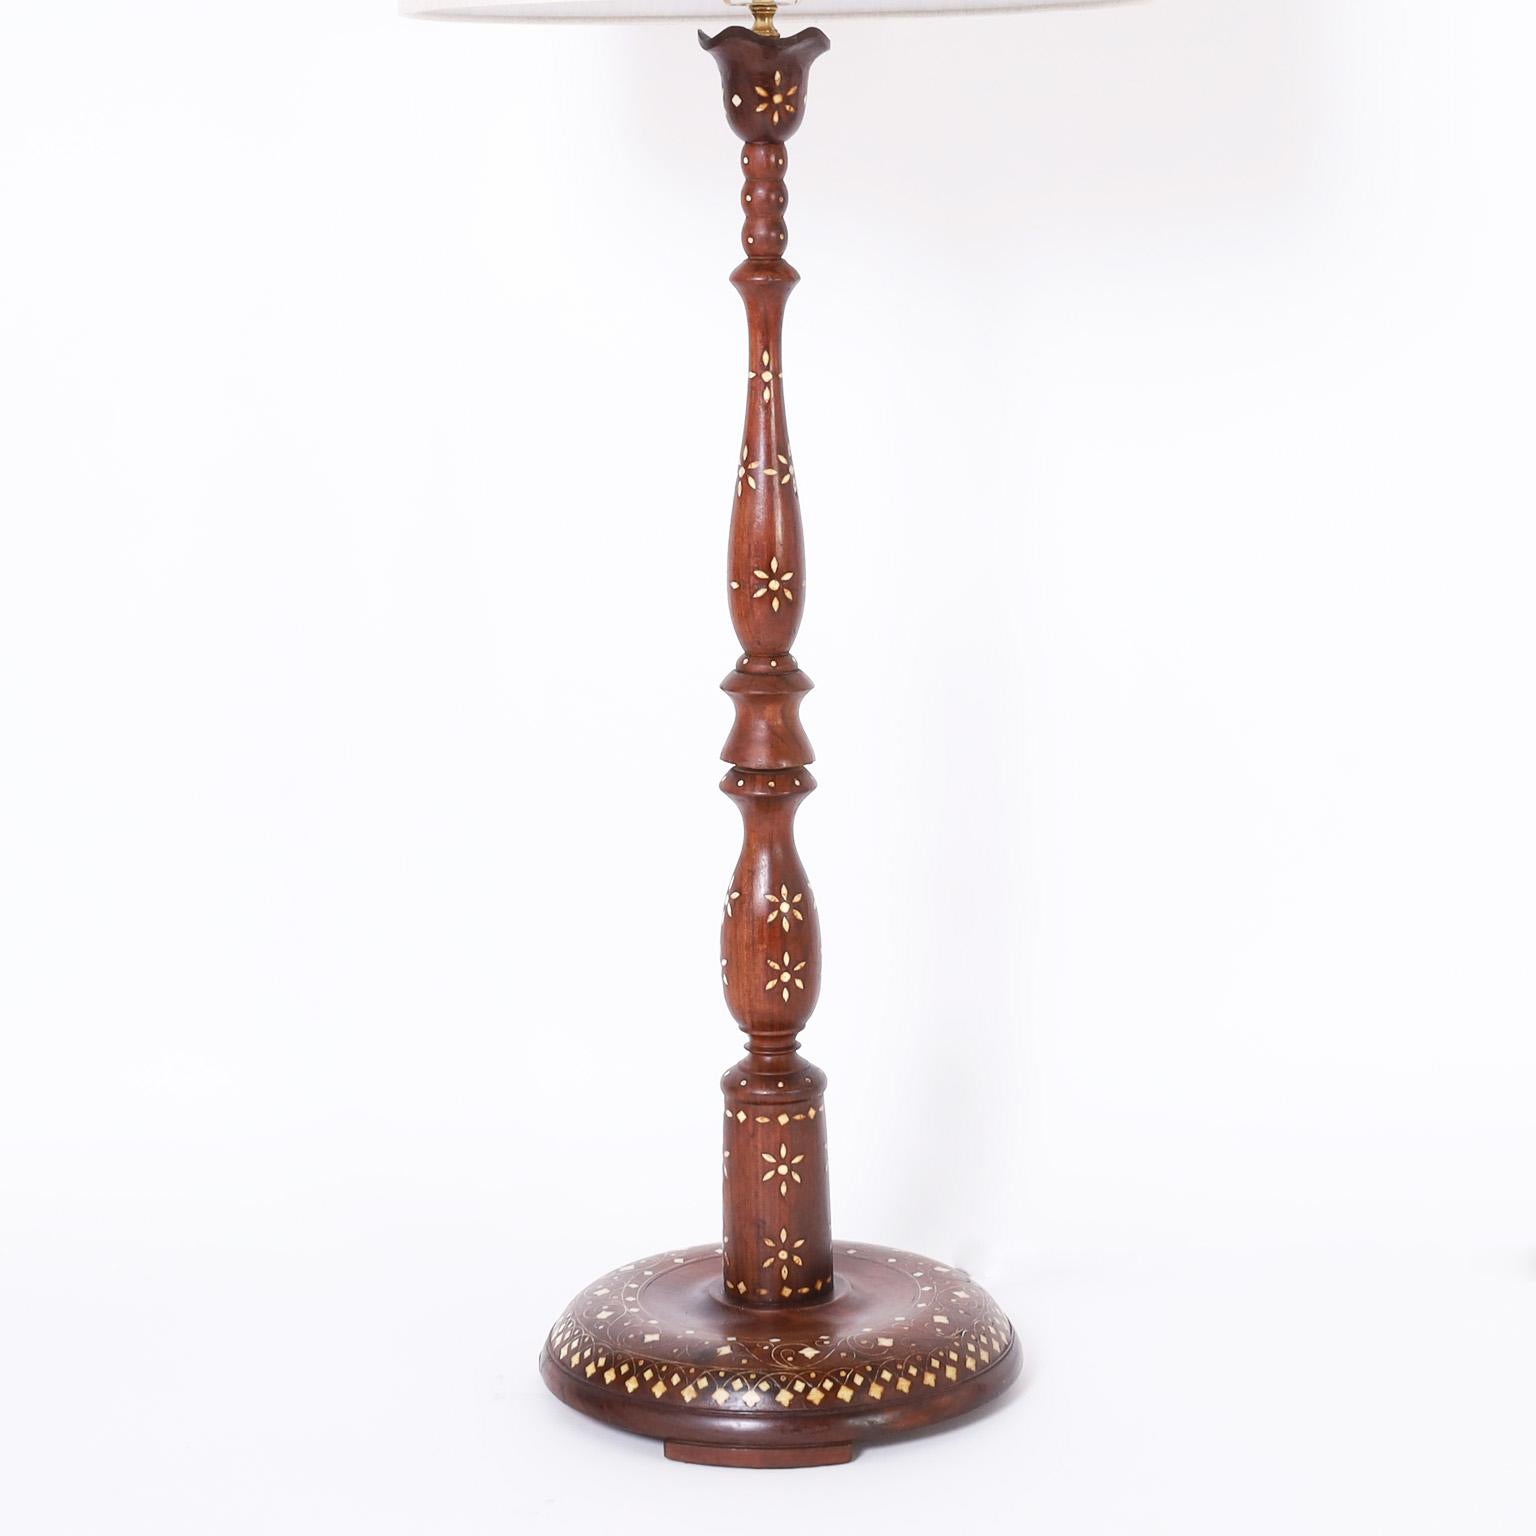 Exotic antique Anglo Indian lamp crafted in mahogany with classic turned form and decorated with floral bone inlays.